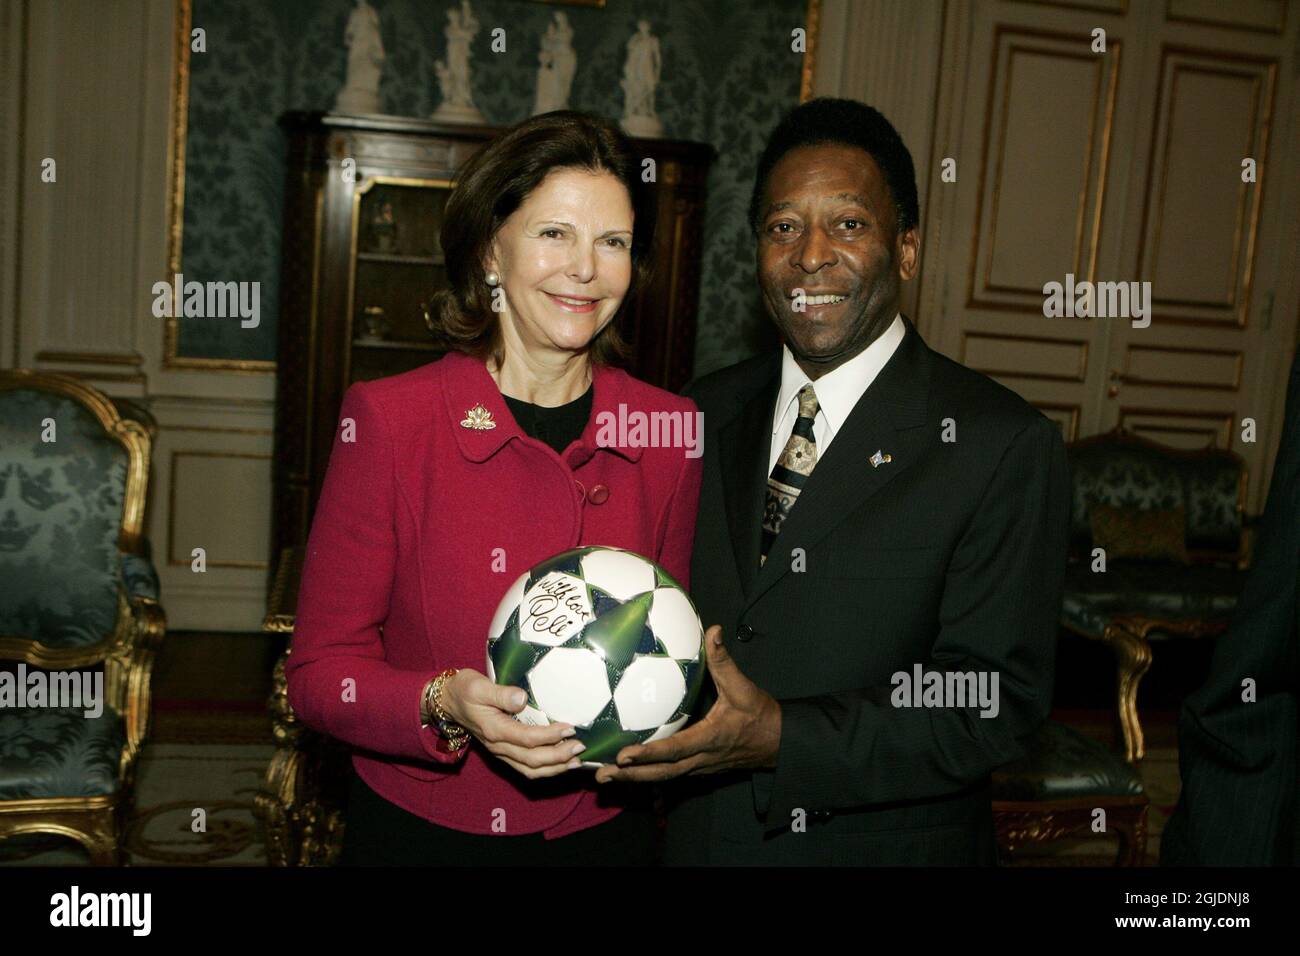 STOCKHOLM 20081118 Queen Silvia and Brazilian soccer legend Pele are seen during a ceremony at the Royal Palace in Stockholm, Sweden, November 18, 2008. Pele who is in Stockholm for the annual Swedish Soccer Awards gave Queen Silvia a signed football. Foto: Mats Andersson / TT / Kod 62210  Stock Photo